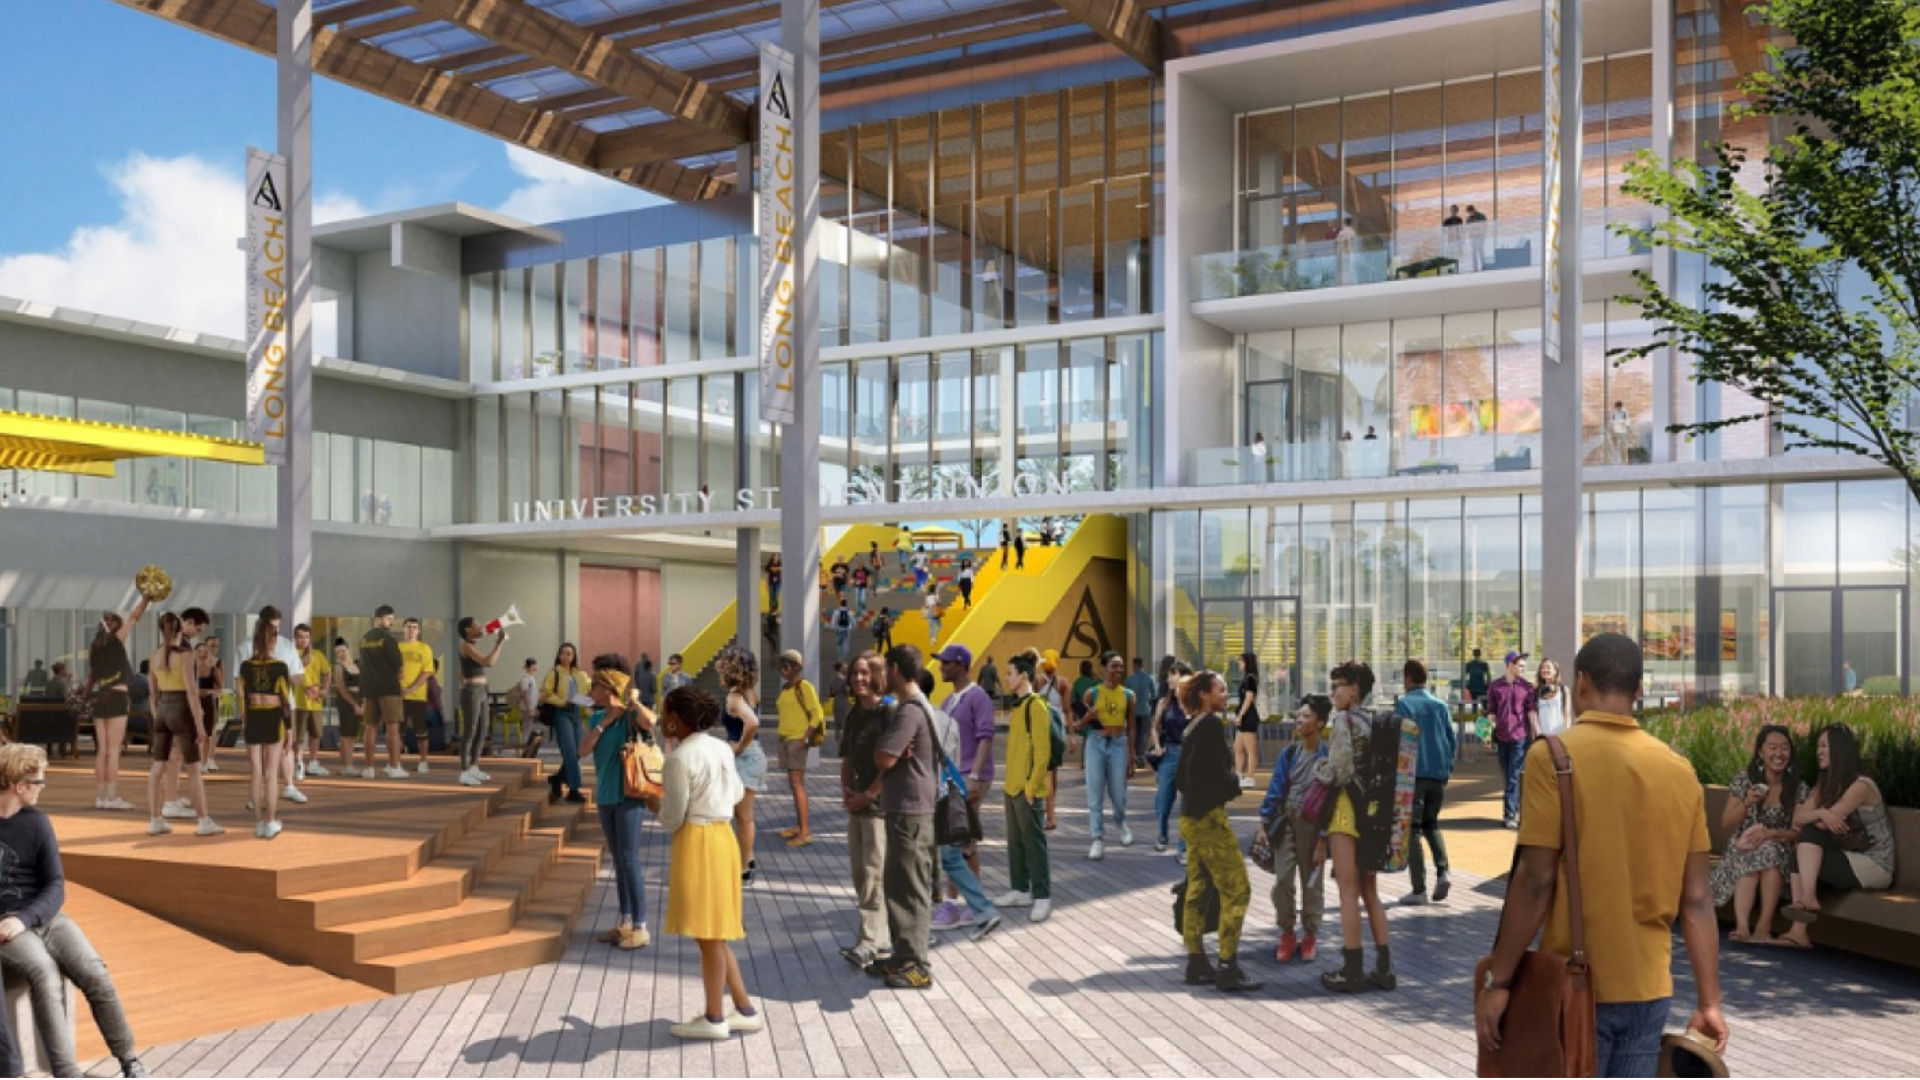 A rendering of the Future U renovation shows students walking through a courtyard of a remodeled student union.